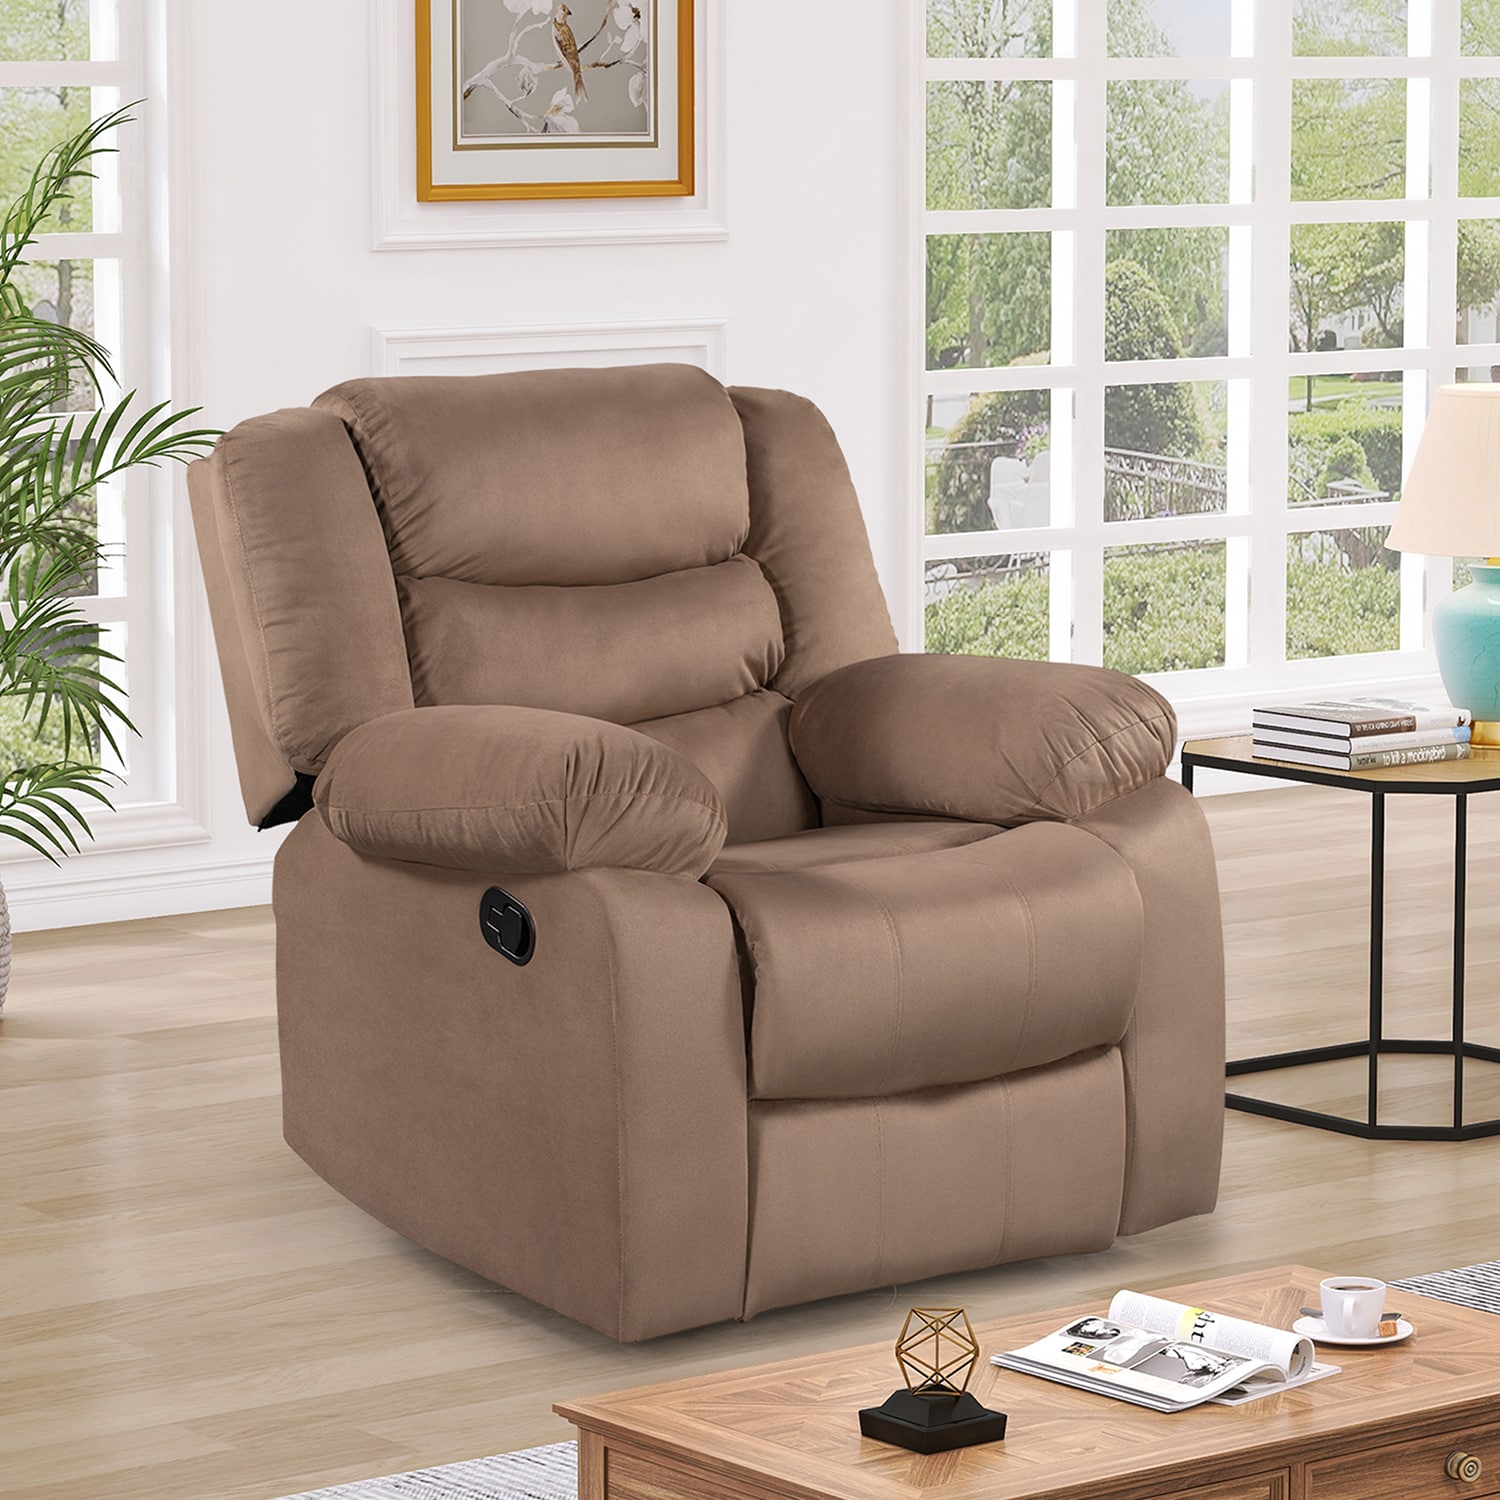 Velvet Recliner Chair Living Room Padded Comfortable Sofa with Overstuffed Seat 